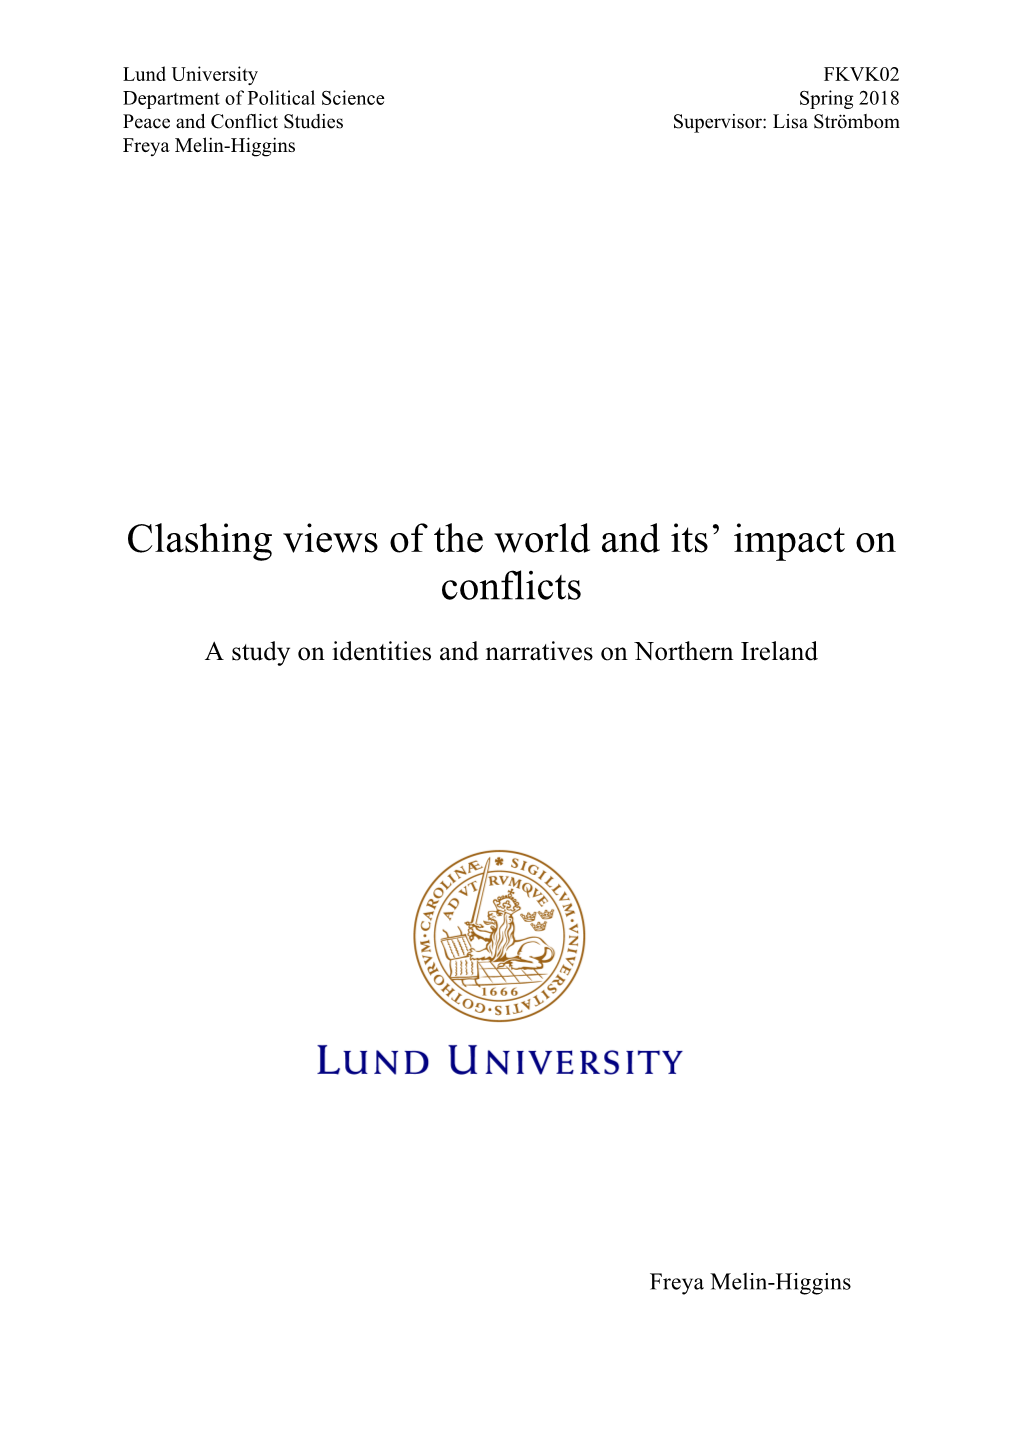 Clashing Views of the World and Its' Impact on Conflicts